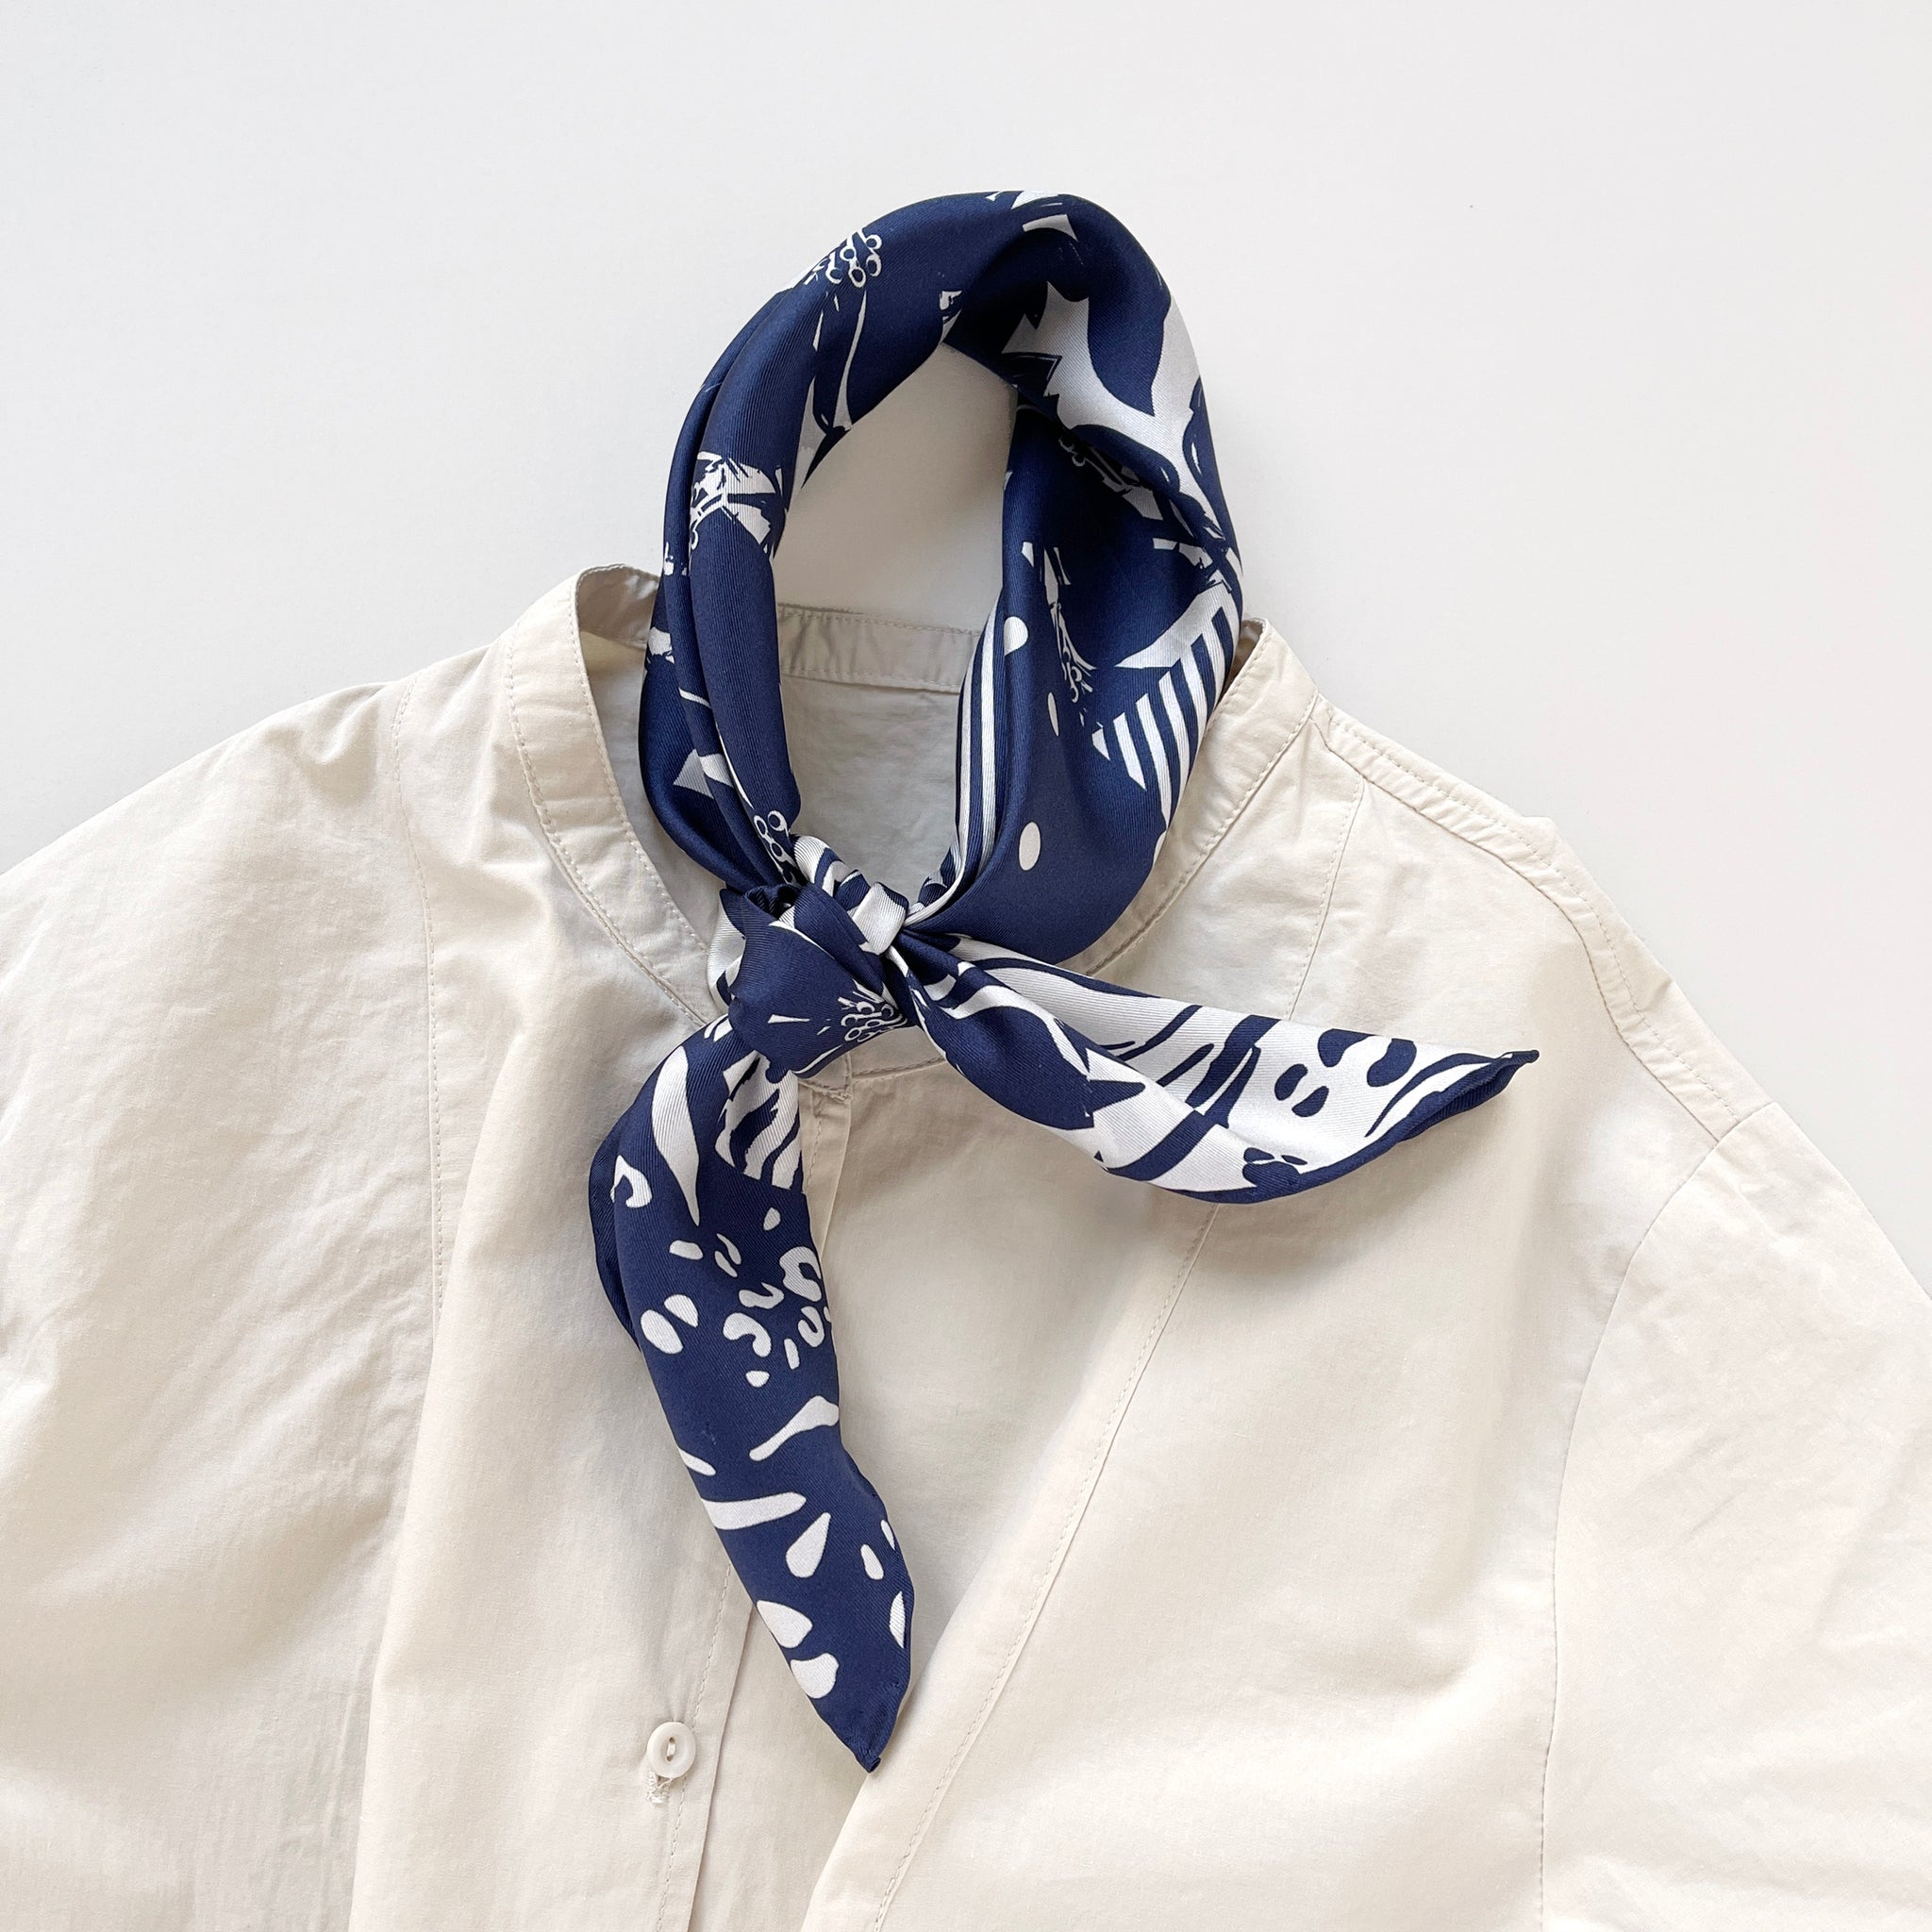 a white and blue square silk scarf featuring the combination of floral motifs, polka dots, and stripes prints with hand-rolled edges, knotted as a neckerchief, paired with a light beige women's shirt